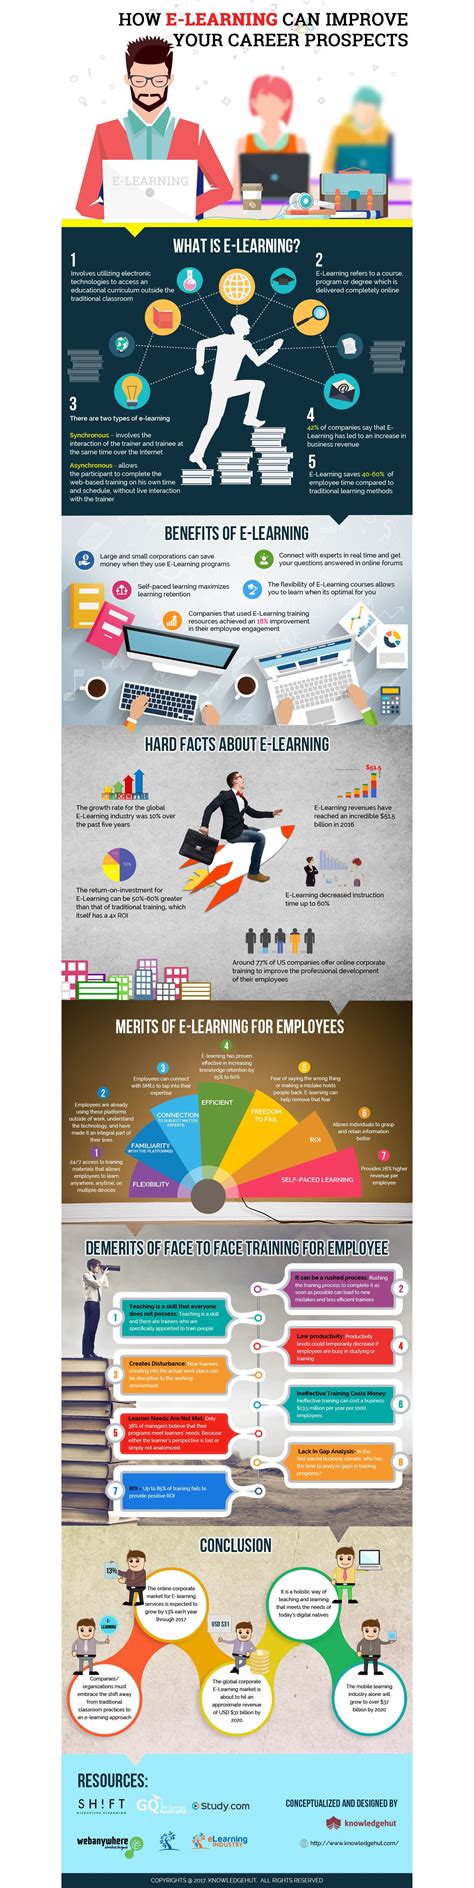 How Elearning Can Help Improve Your Career Prospects Infographic E